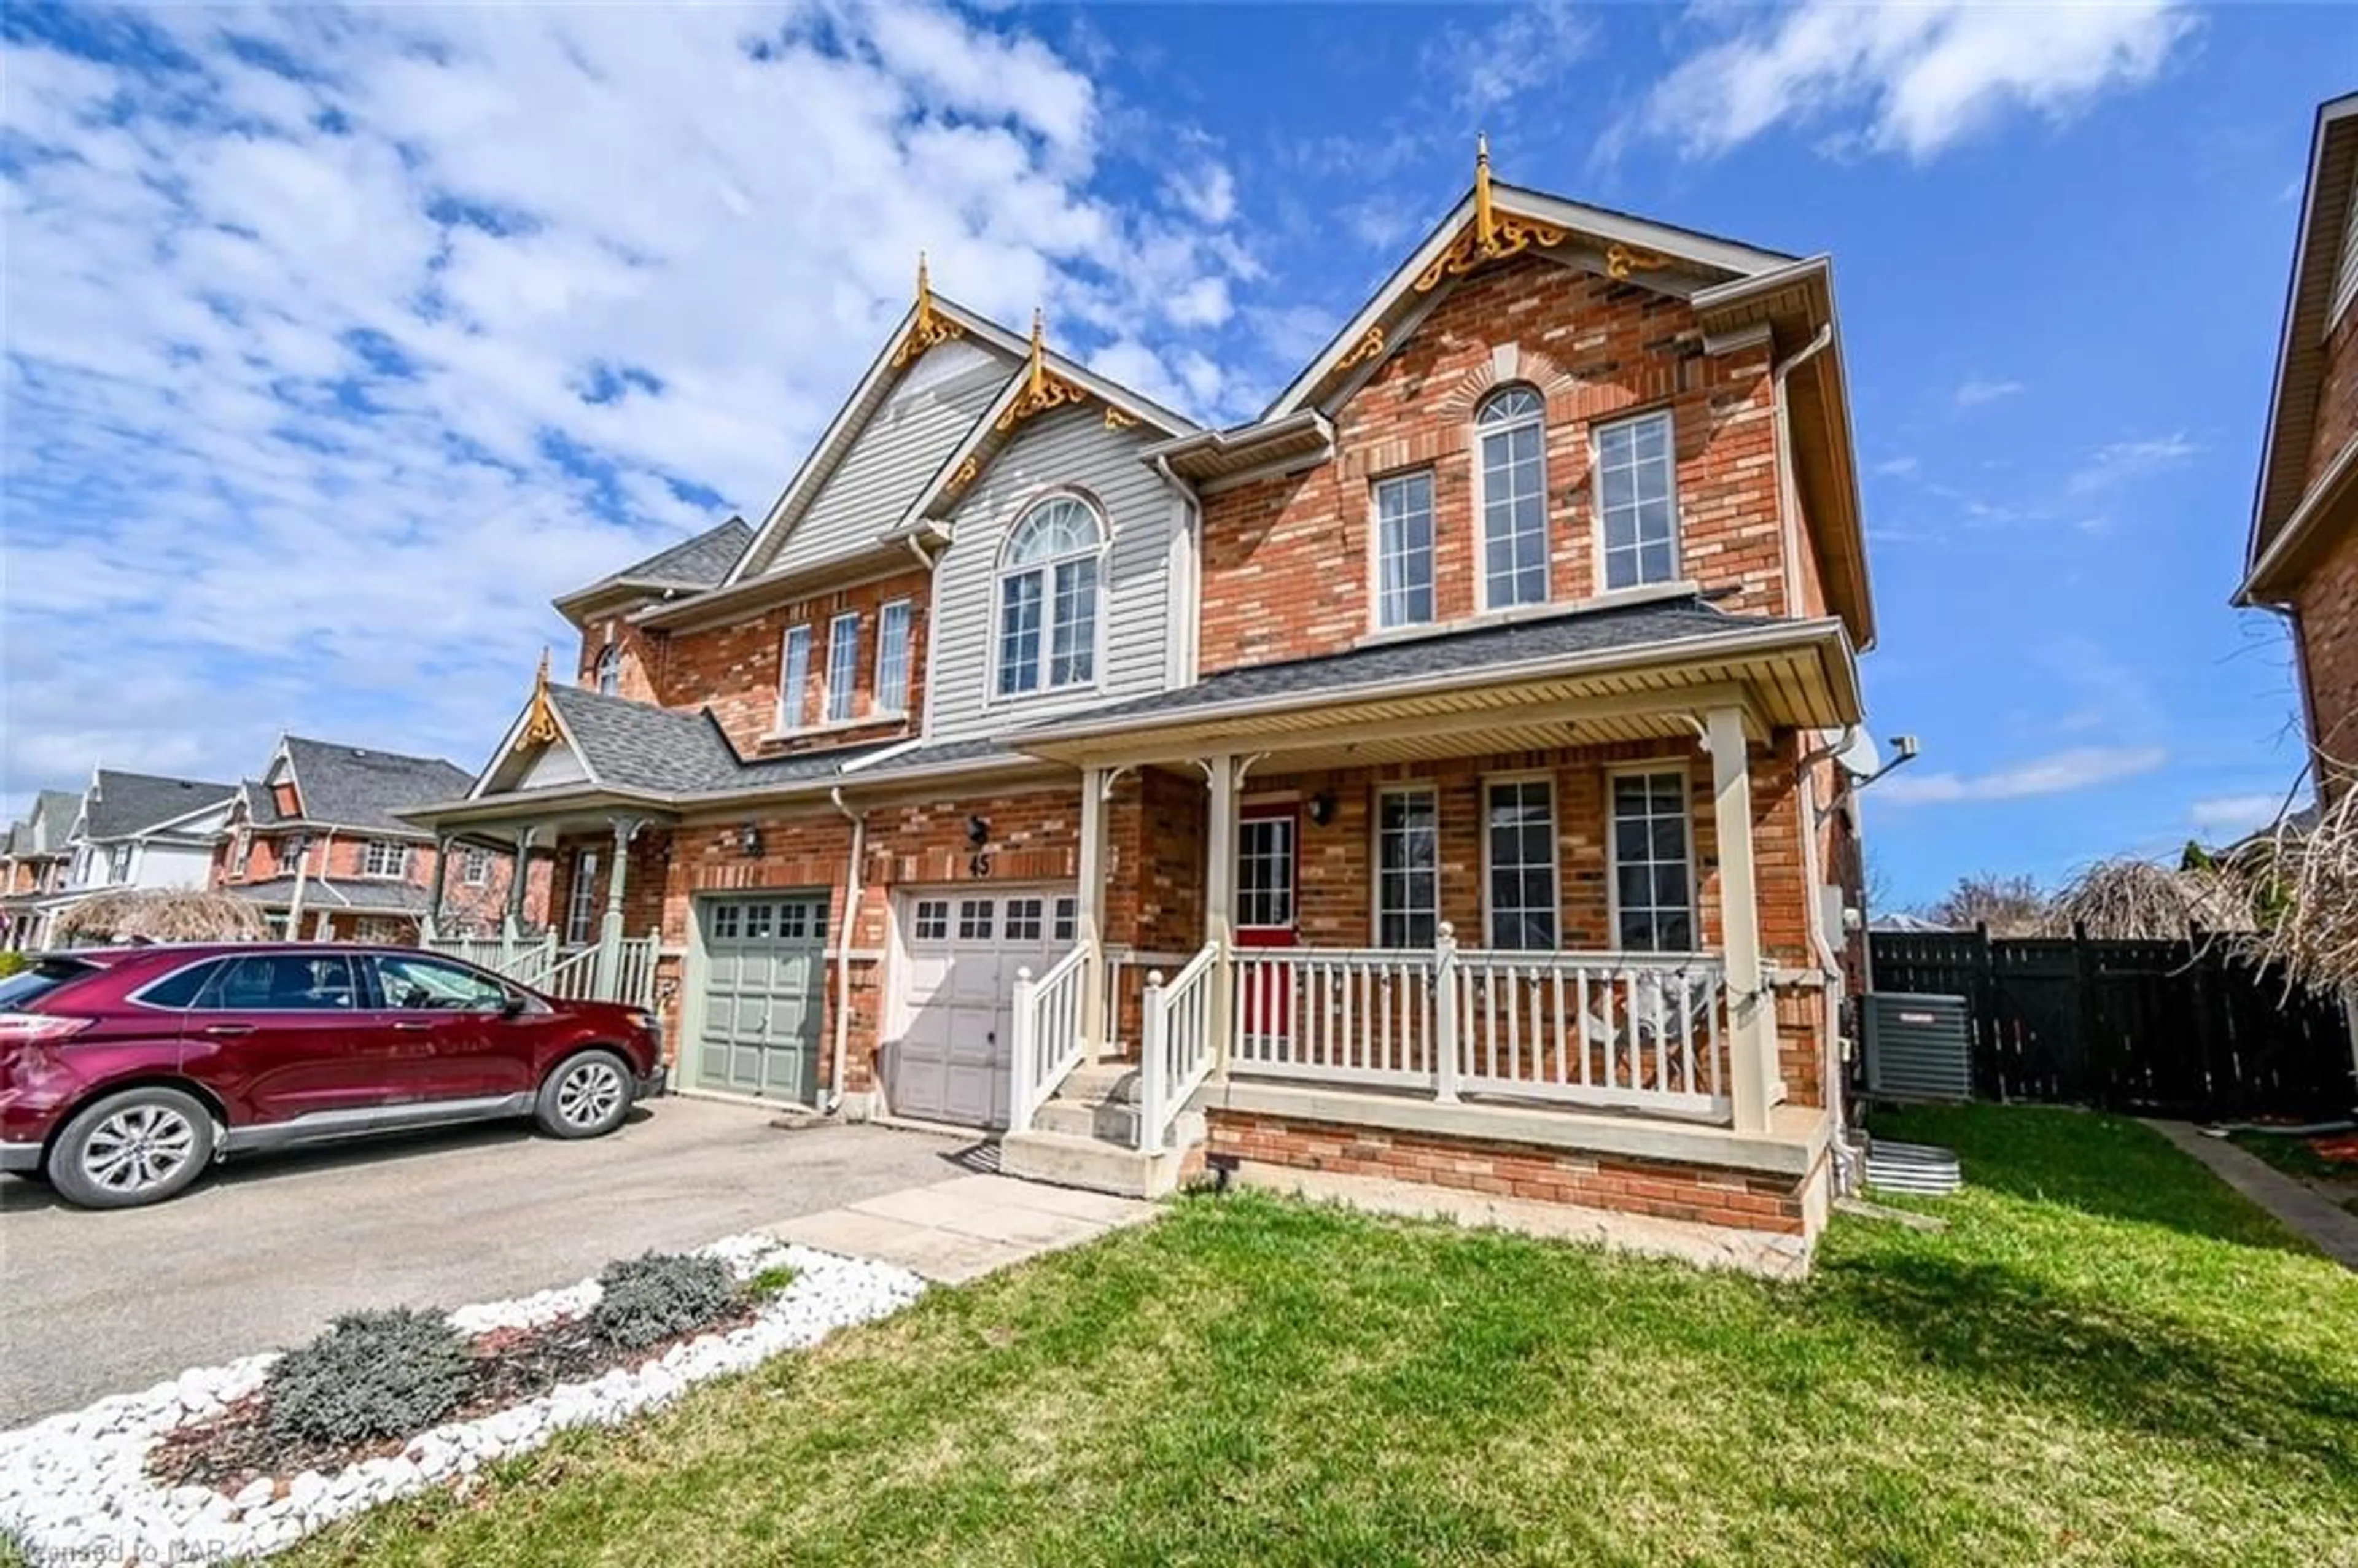 Home with brick exterior material for 45 Niagara On The Green Blvd, Niagara-on-the-Lake Ontario L0S 1J0